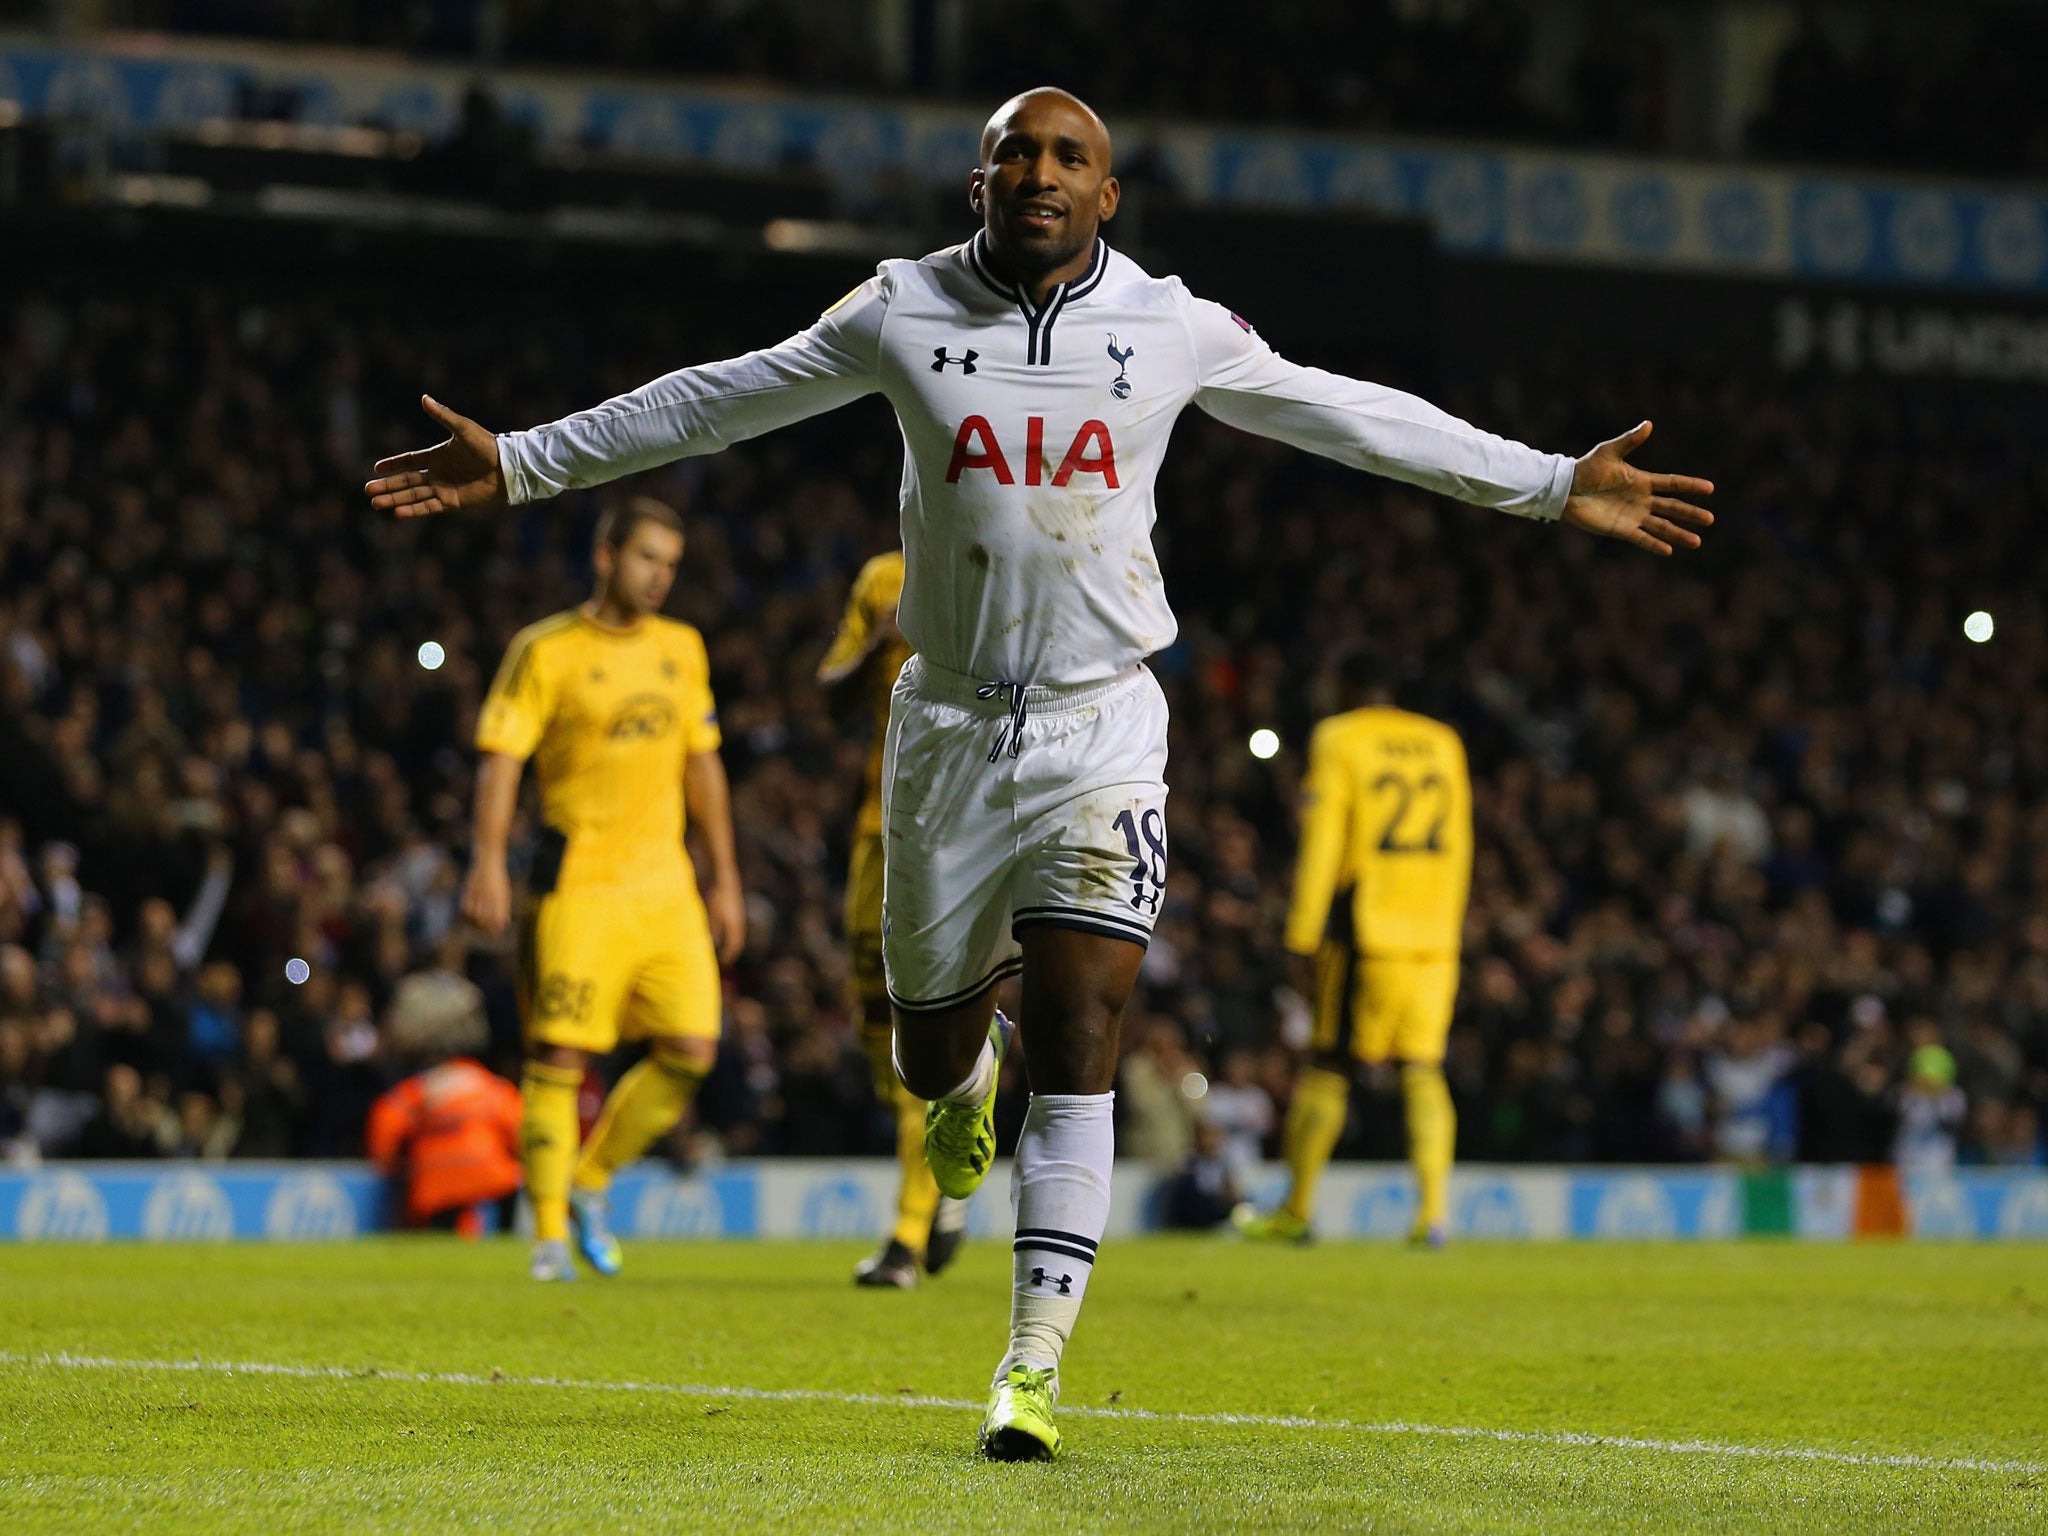 Tottenham striker Jermain Defoe became the club's top goalscorer in Europe with his penalty against Sheriff